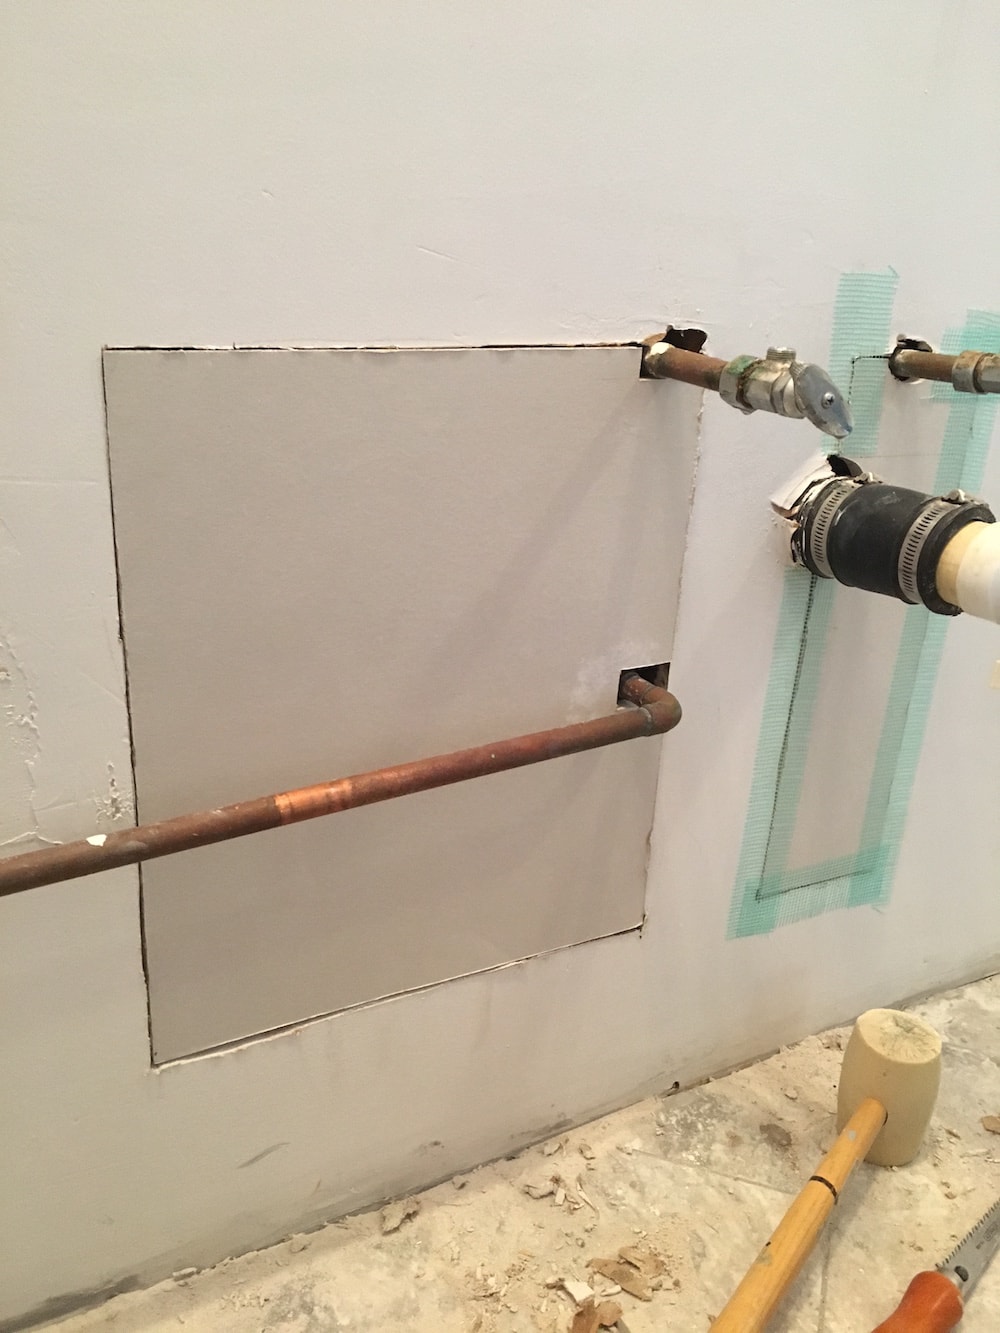 How-to-repair-big-drywall-holes-in-wall-Thrift-Diving - 3621